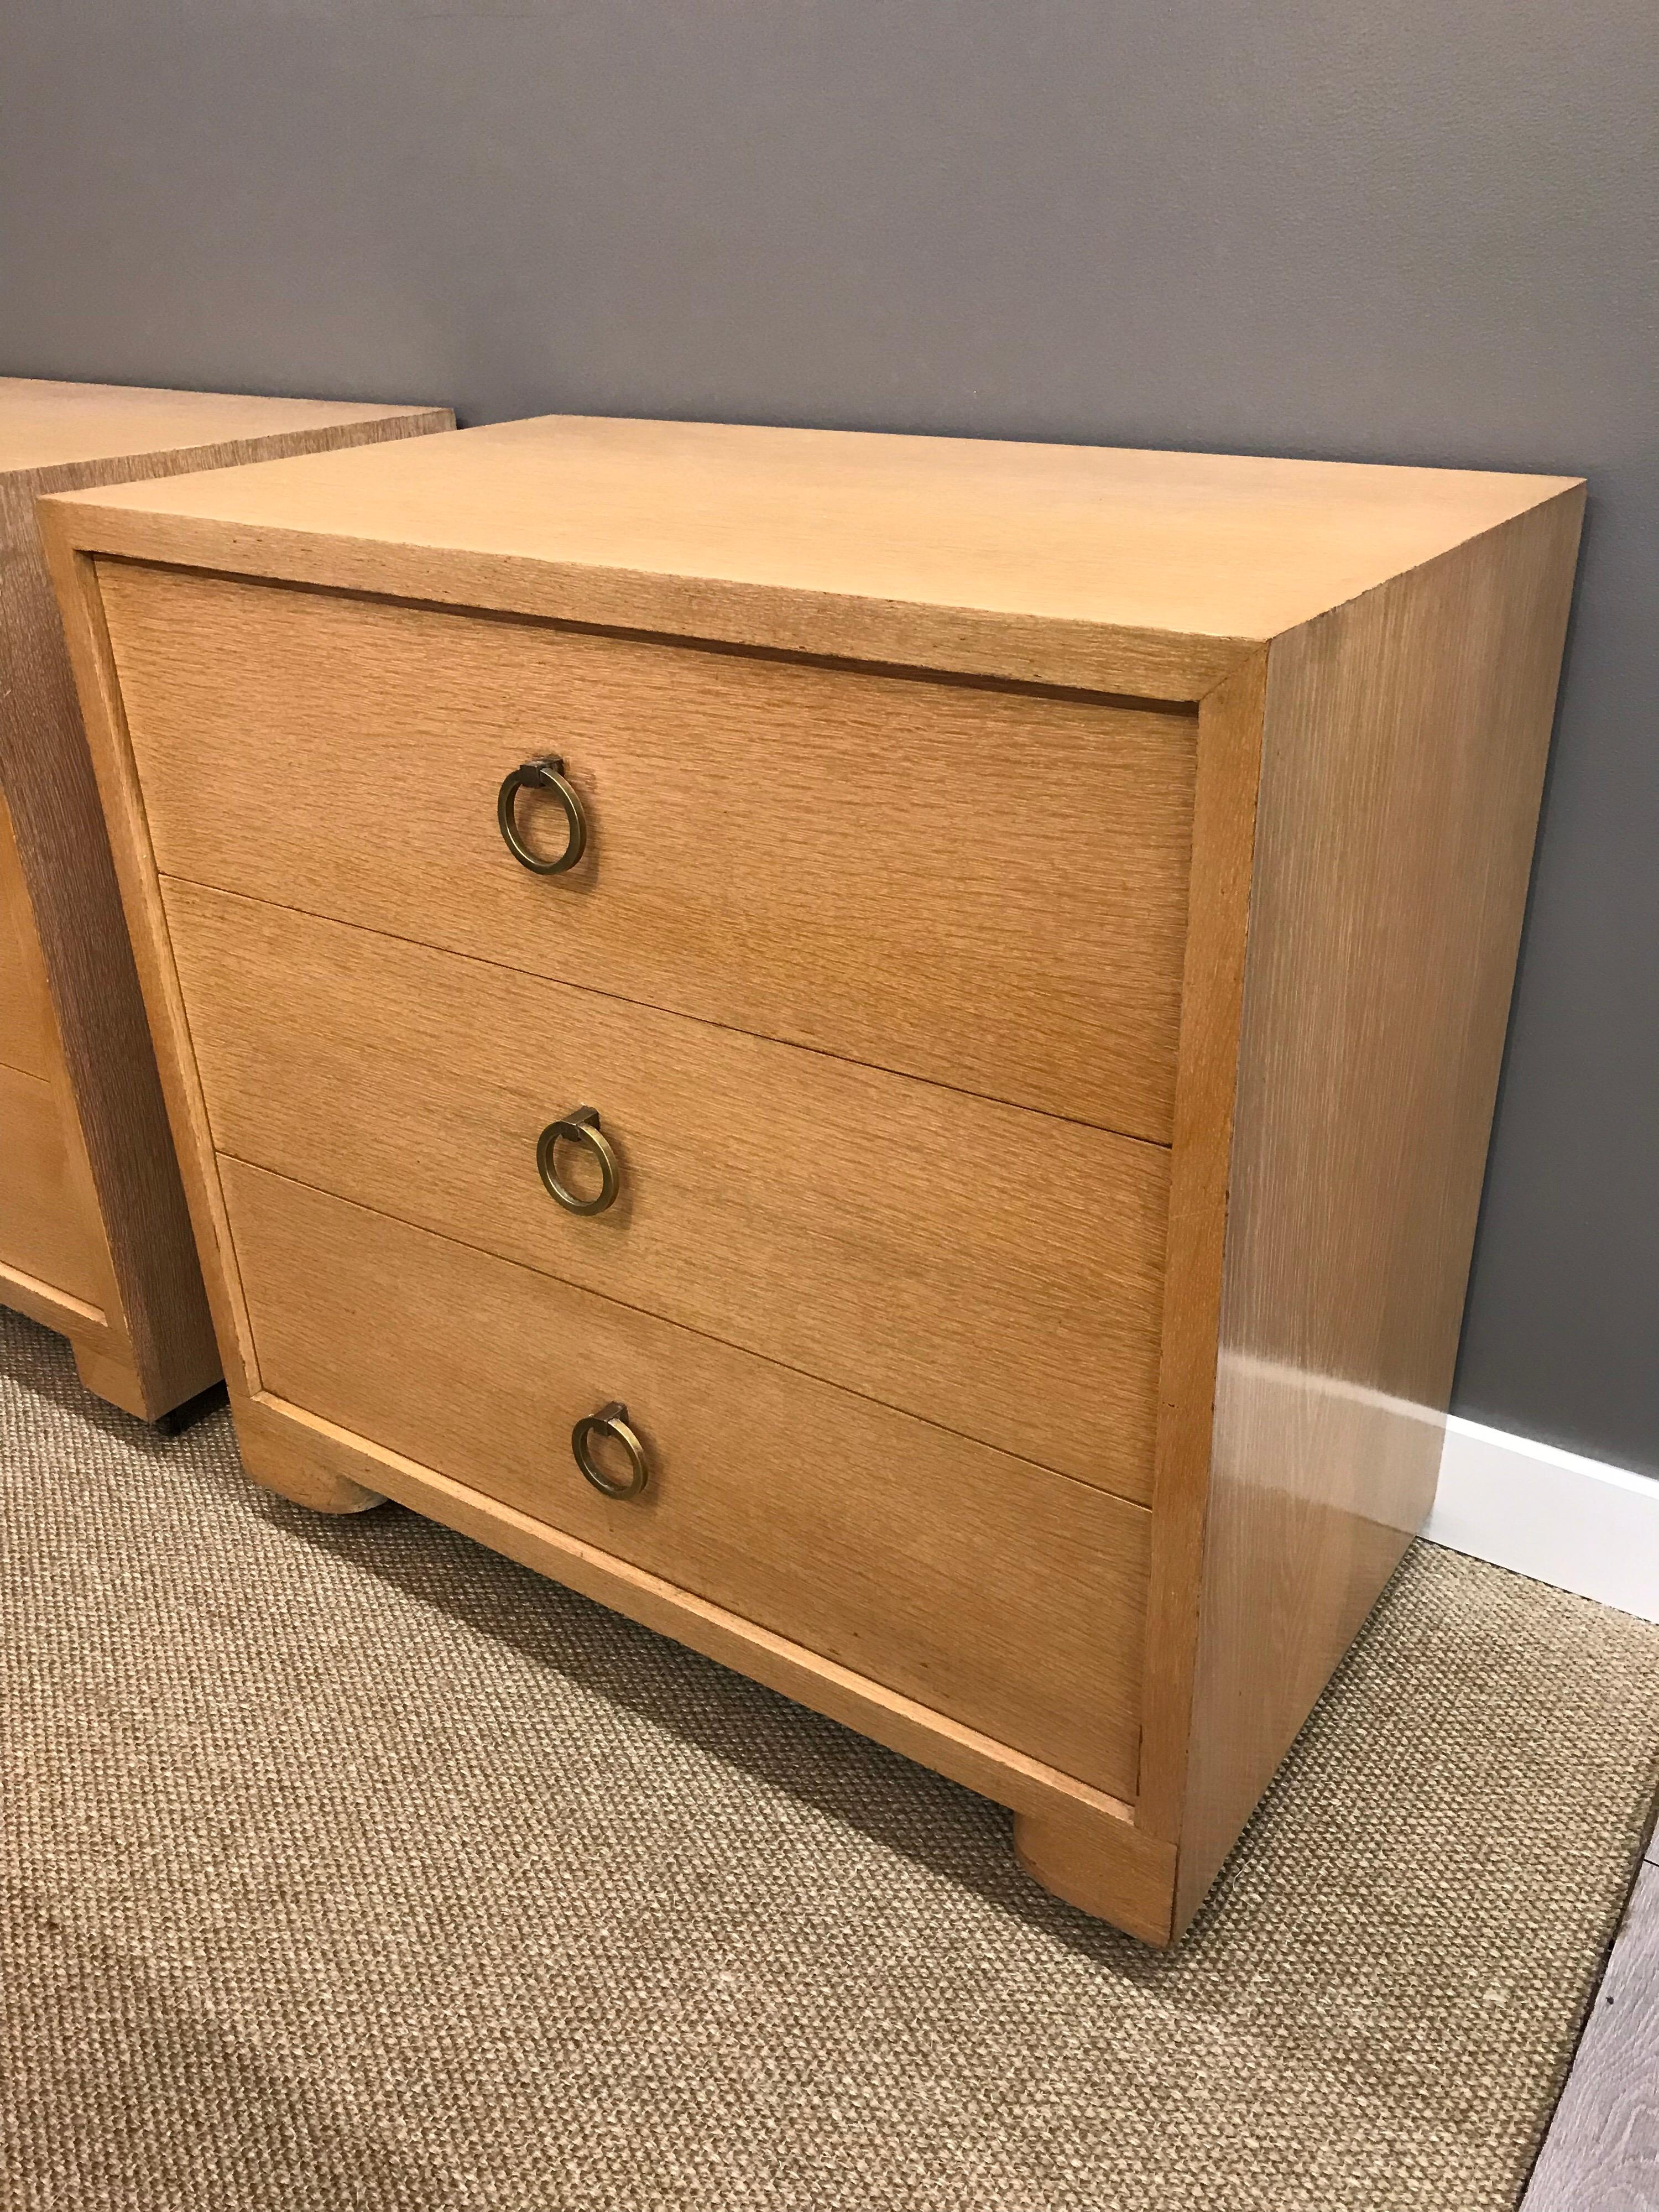 Birch and walnut small dressers on casters done in birch and walnut. They feature the Classic brass drawer pulls. Made by John Widdicomb in the 1950s. No manufacturer hallmarks.